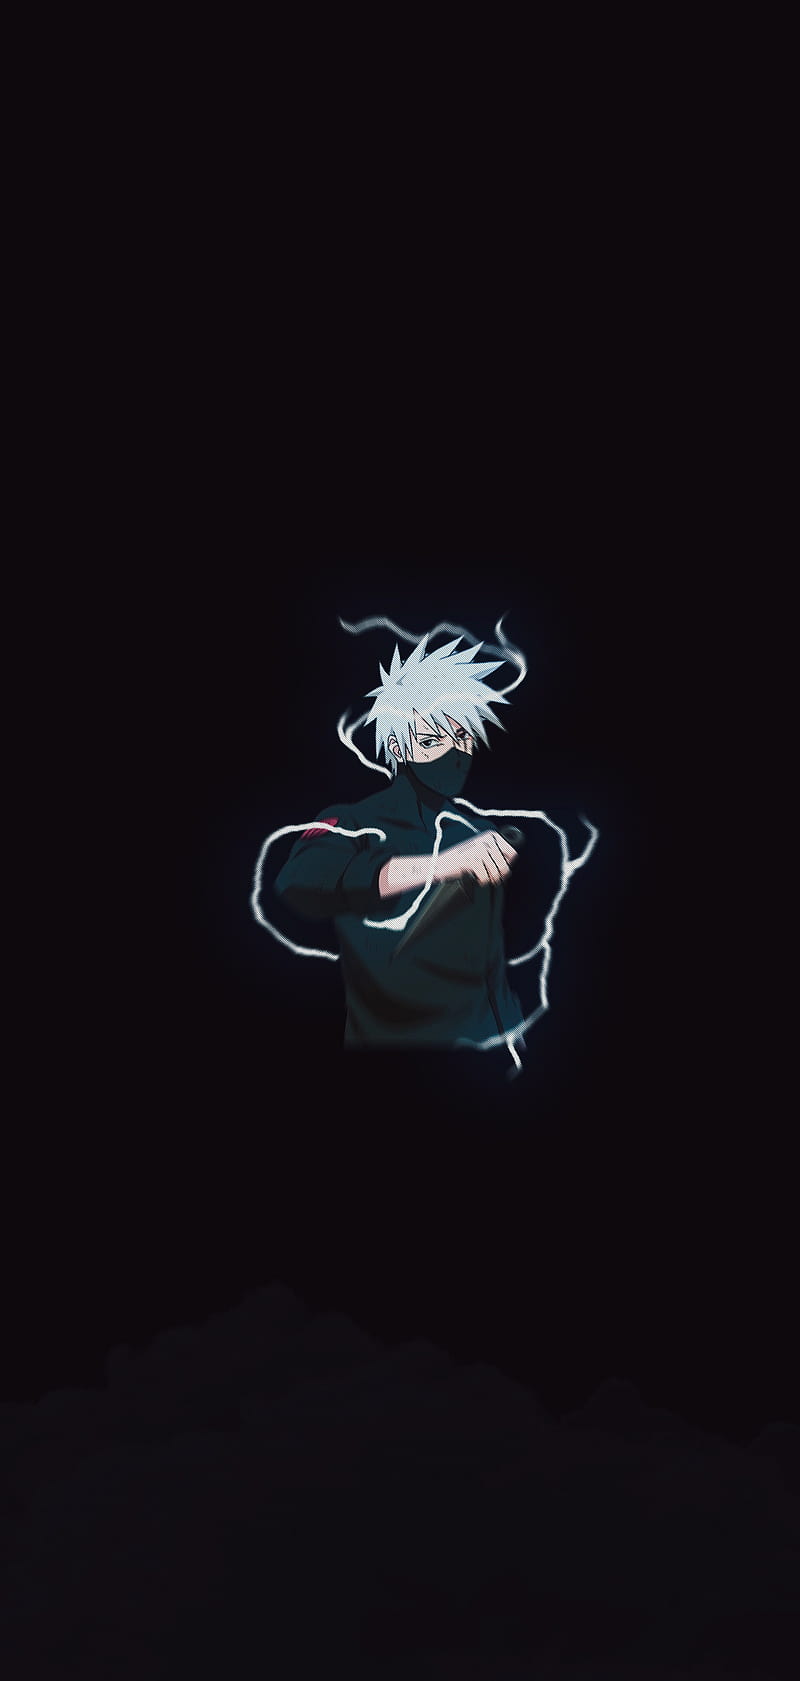 Top 10 Best Kakashi iPhone Wallpapers [ HQ ]